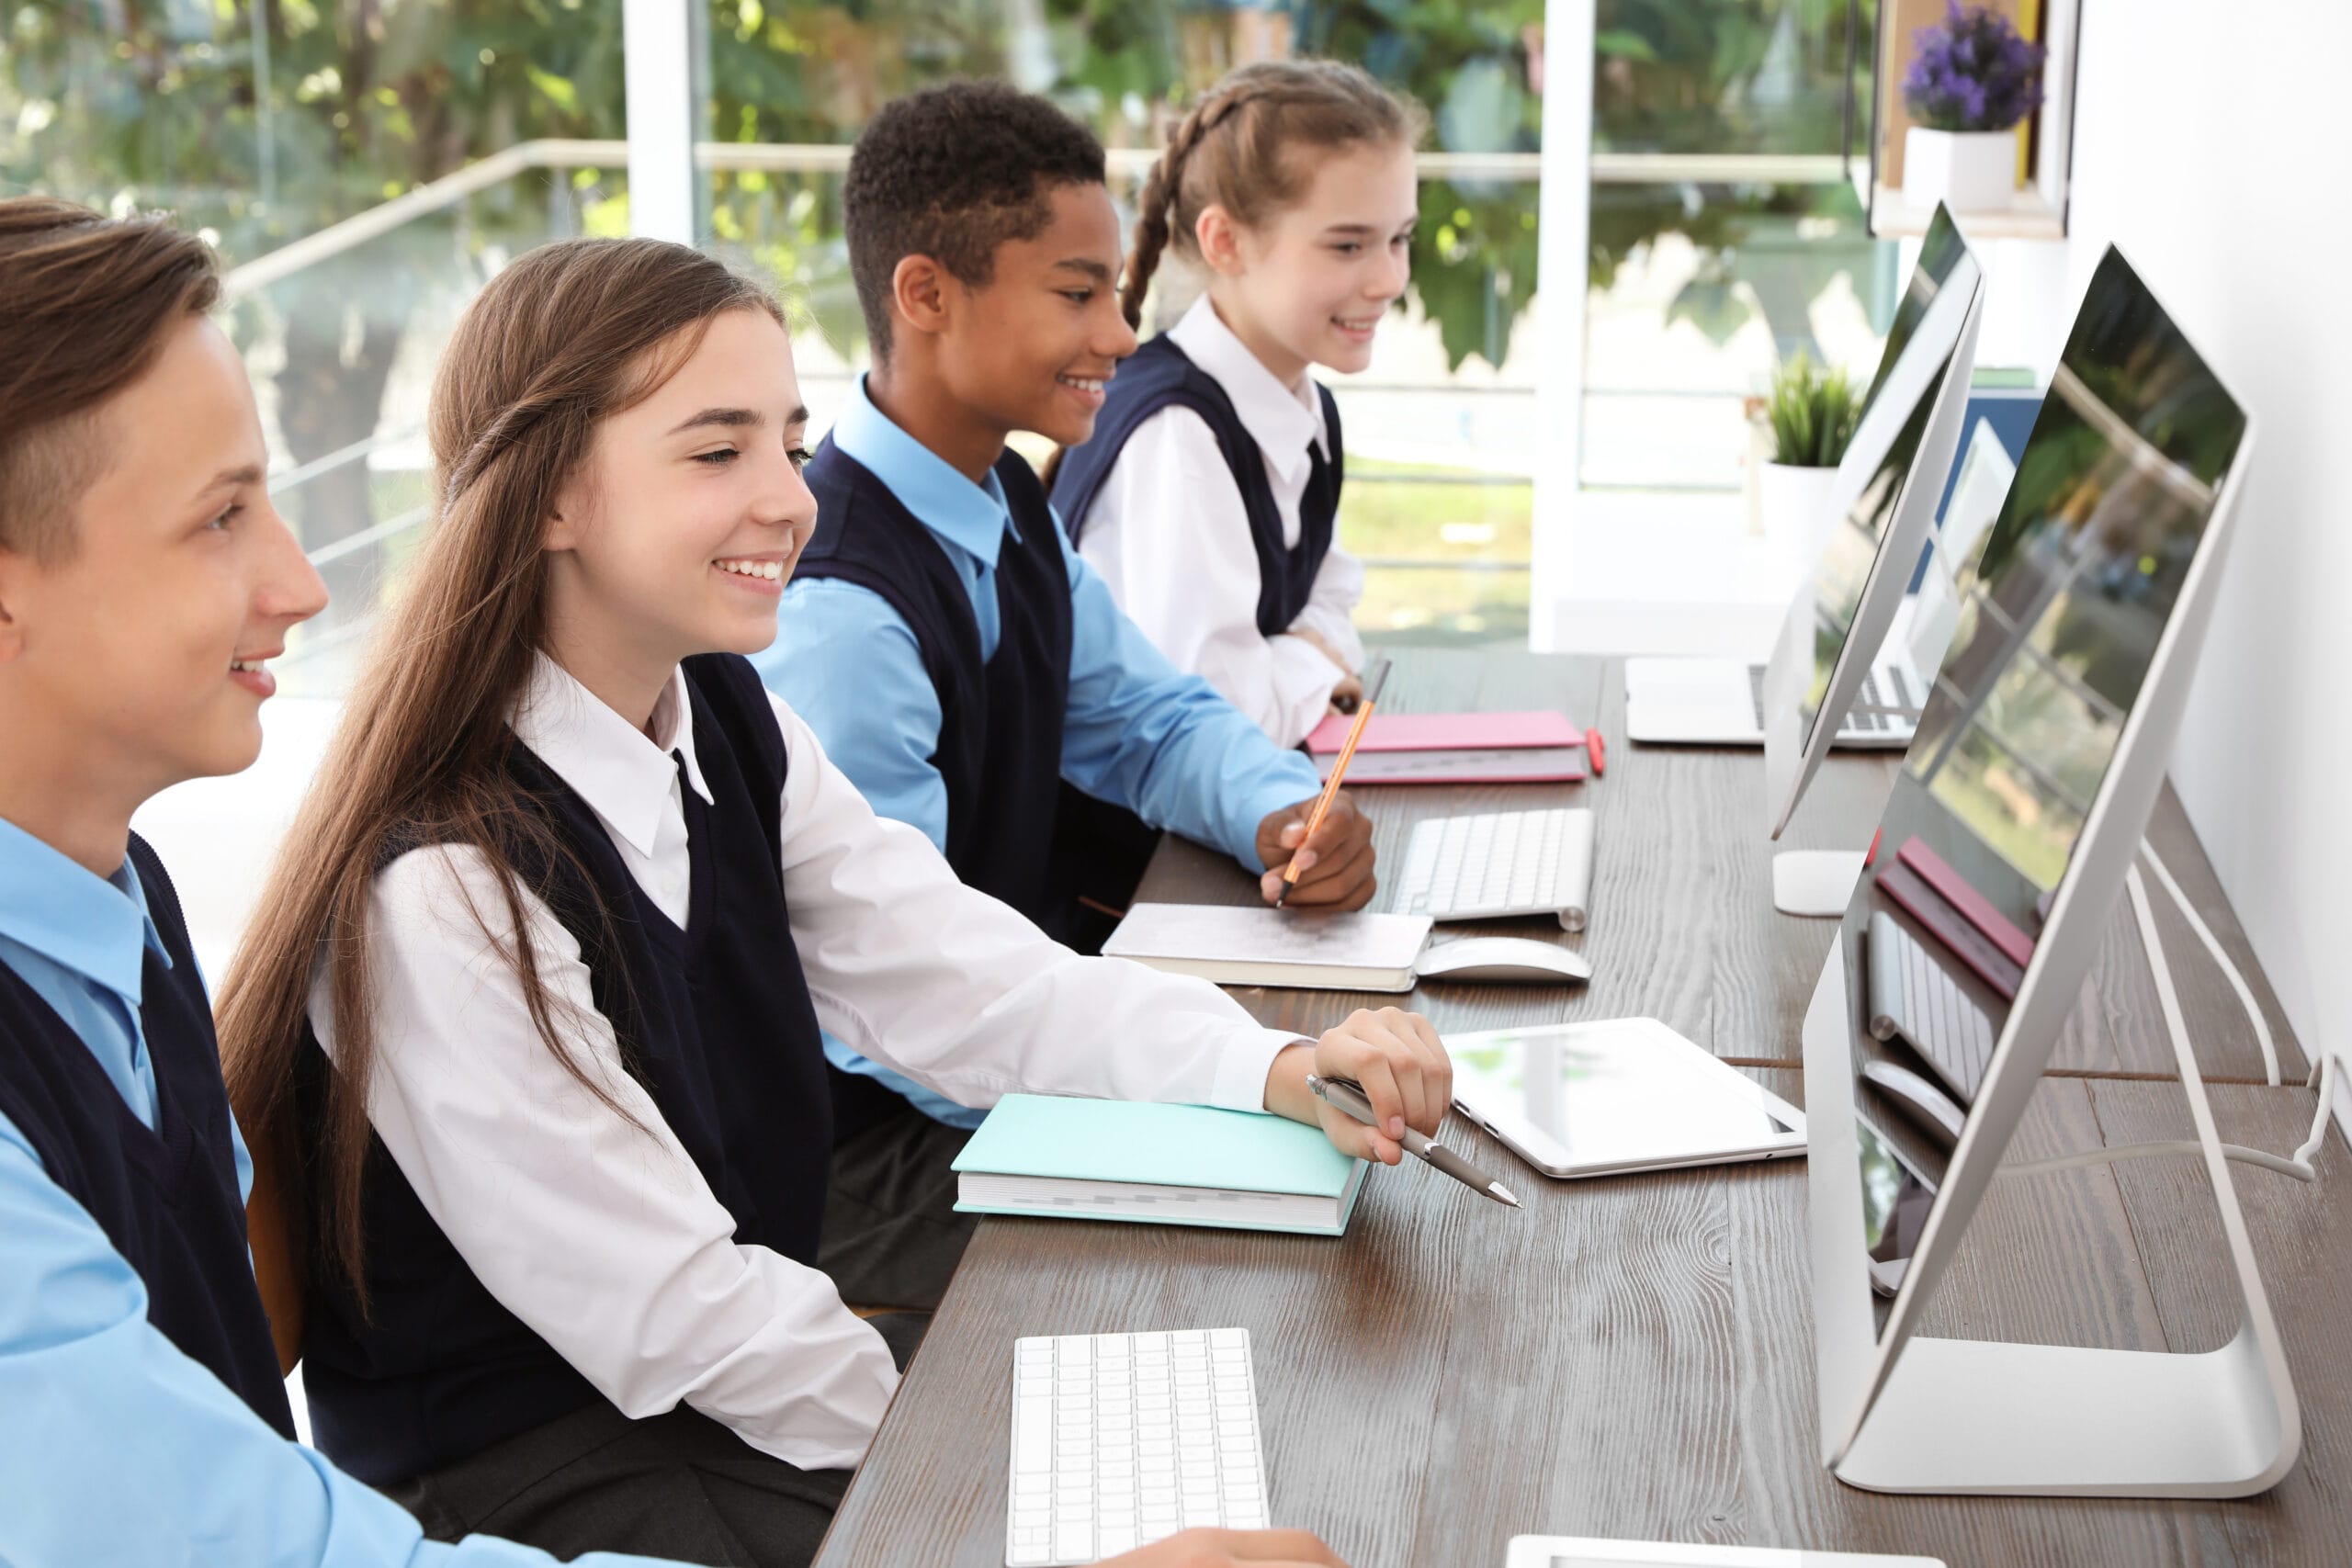 Teenage students in stylish school uniform at desks with compute